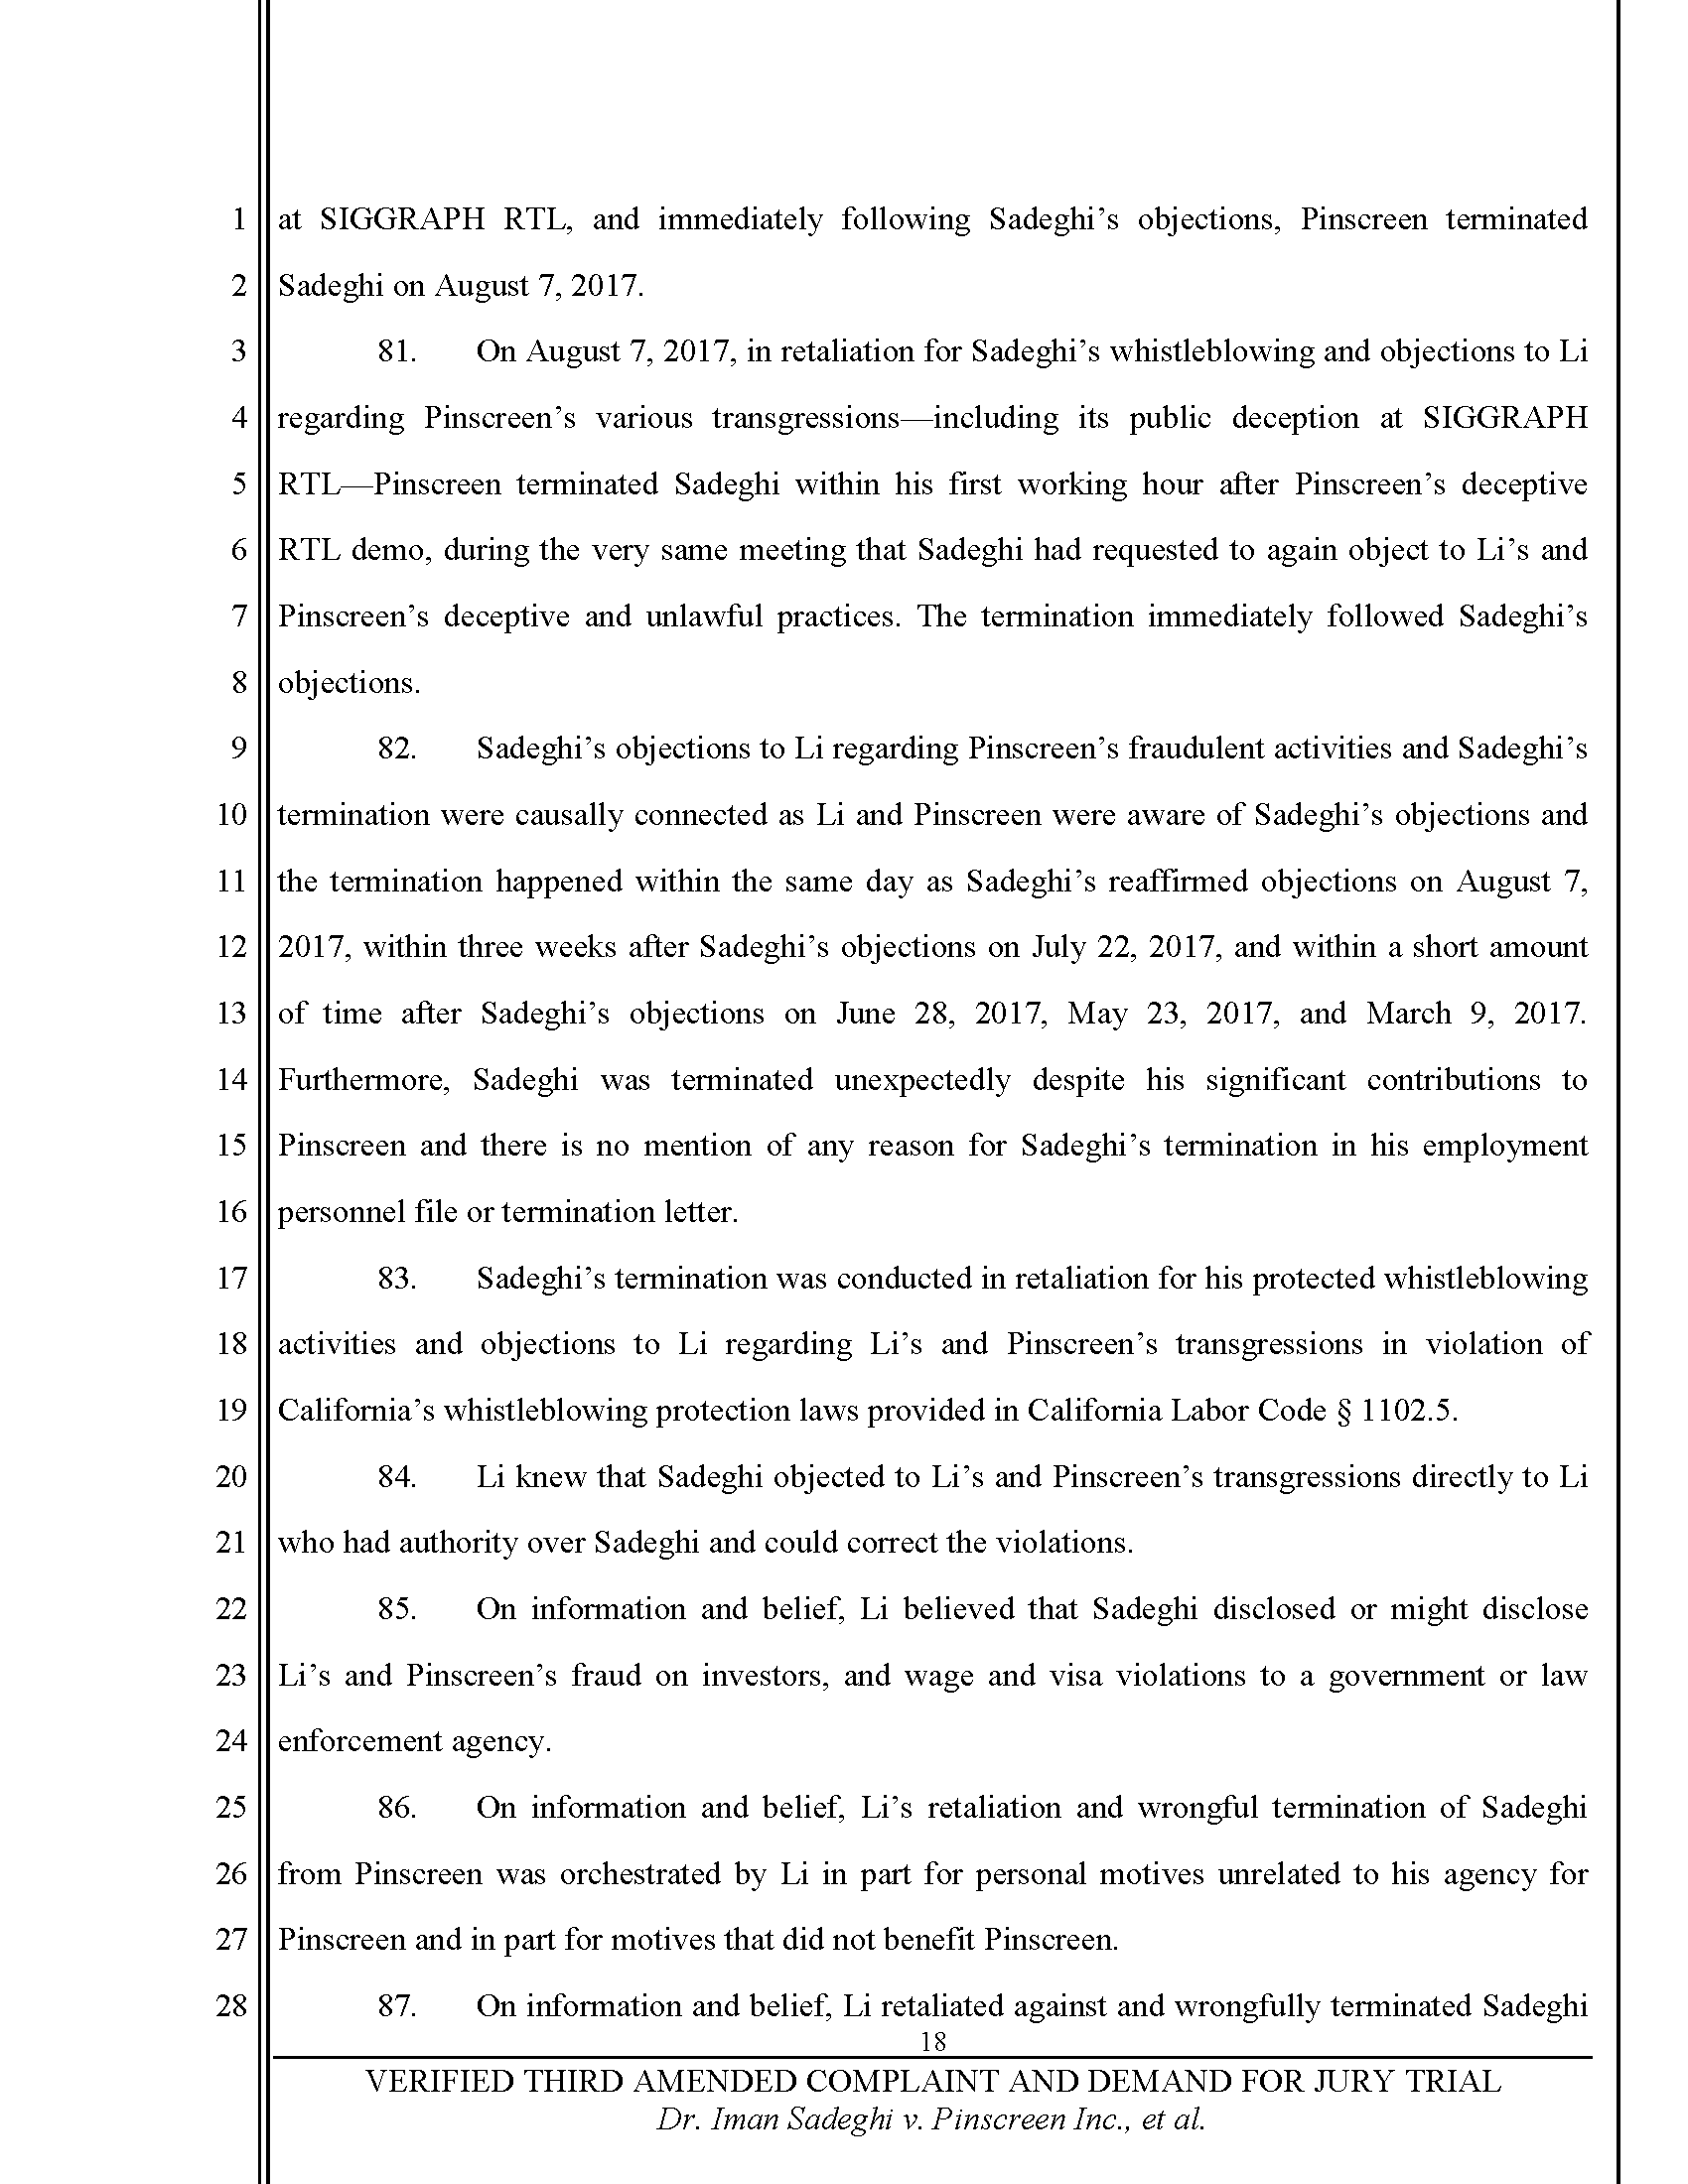 Third Amended Complaint (TAC) Page 19